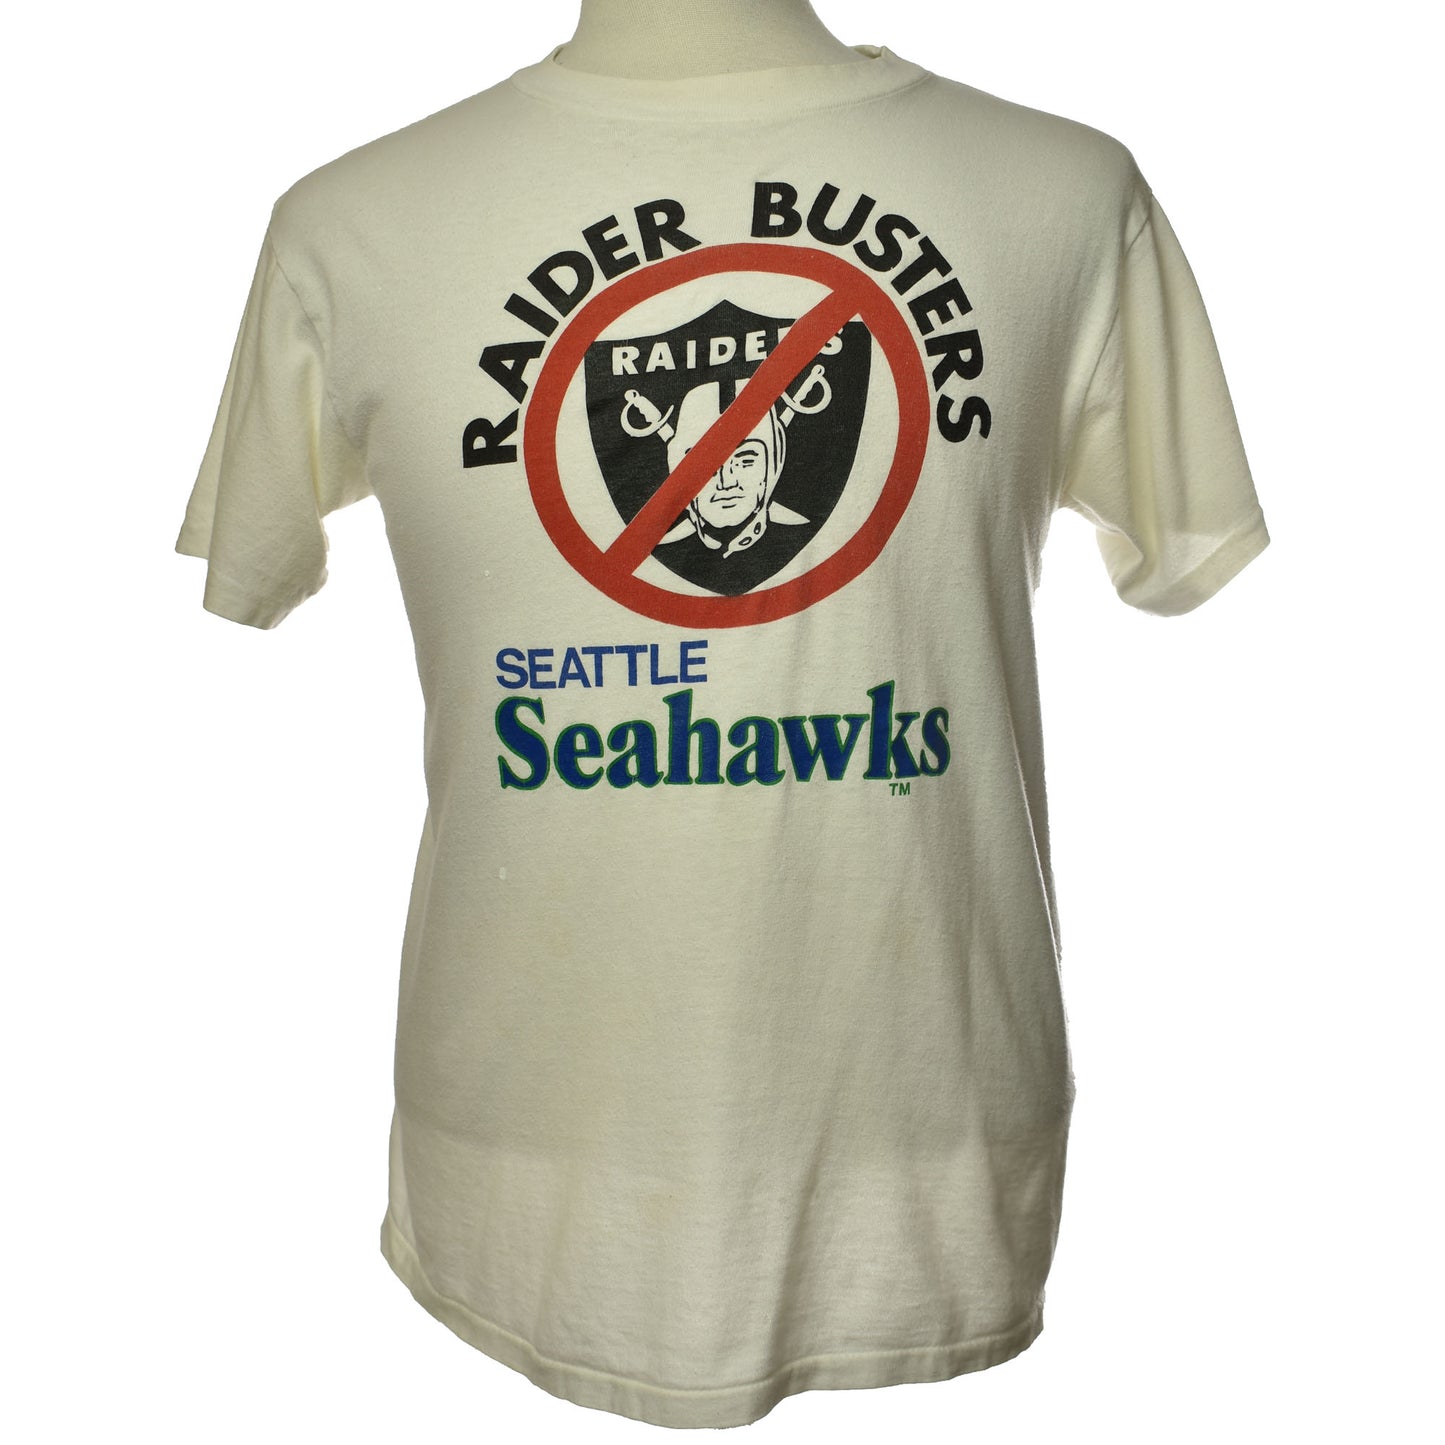 Vintage 80s Raider Busters Seattle Seahawks T-Shirt - Single Stitch